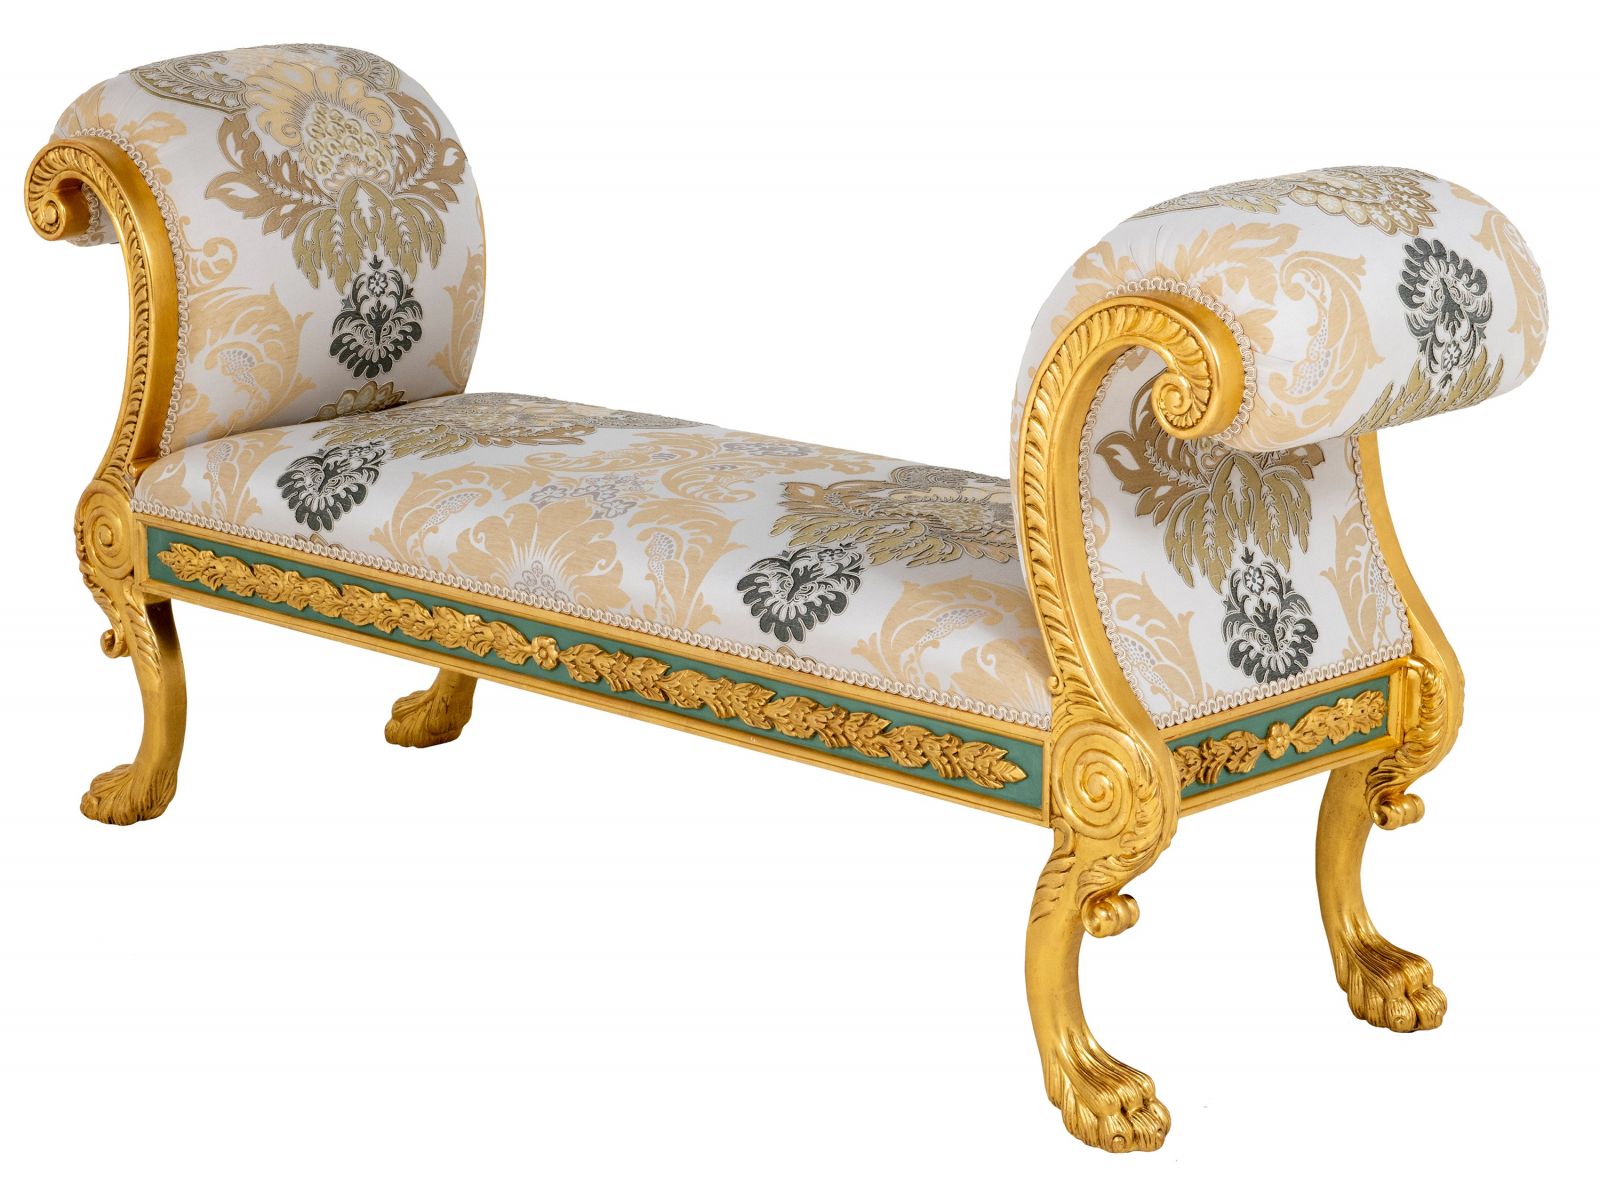 a stunning giltwood window seat by brights of nettlebed inspired by 18th century furniture